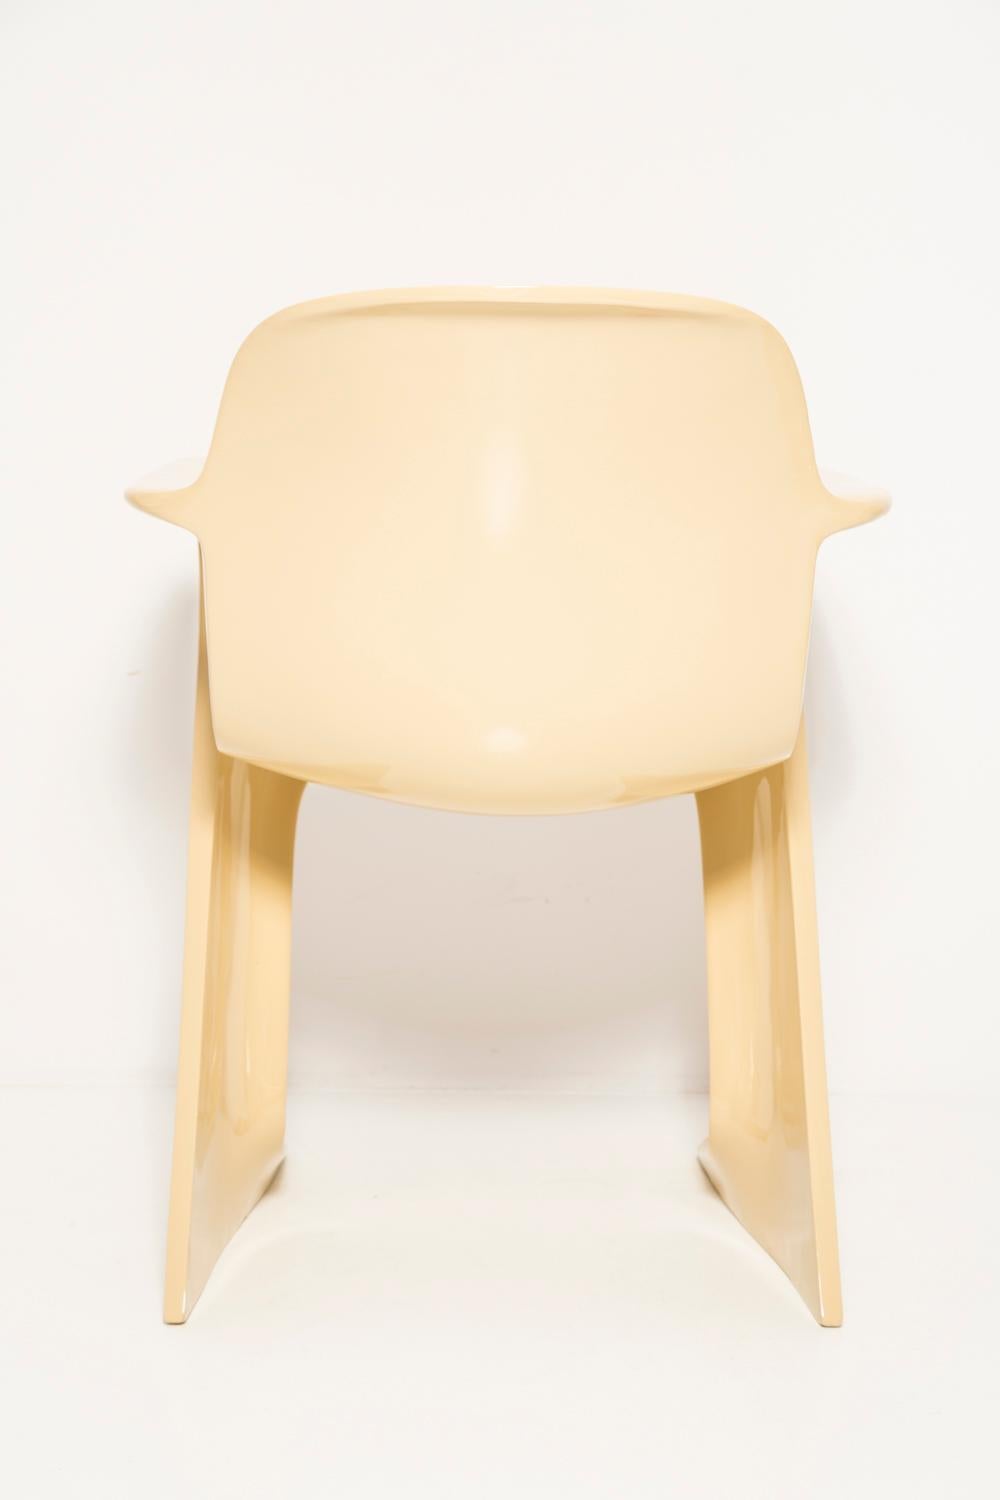 Set of Eight Beige Kangaroo Chairs, by Ernst Moeckl, Germany, 1968 For Sale 1